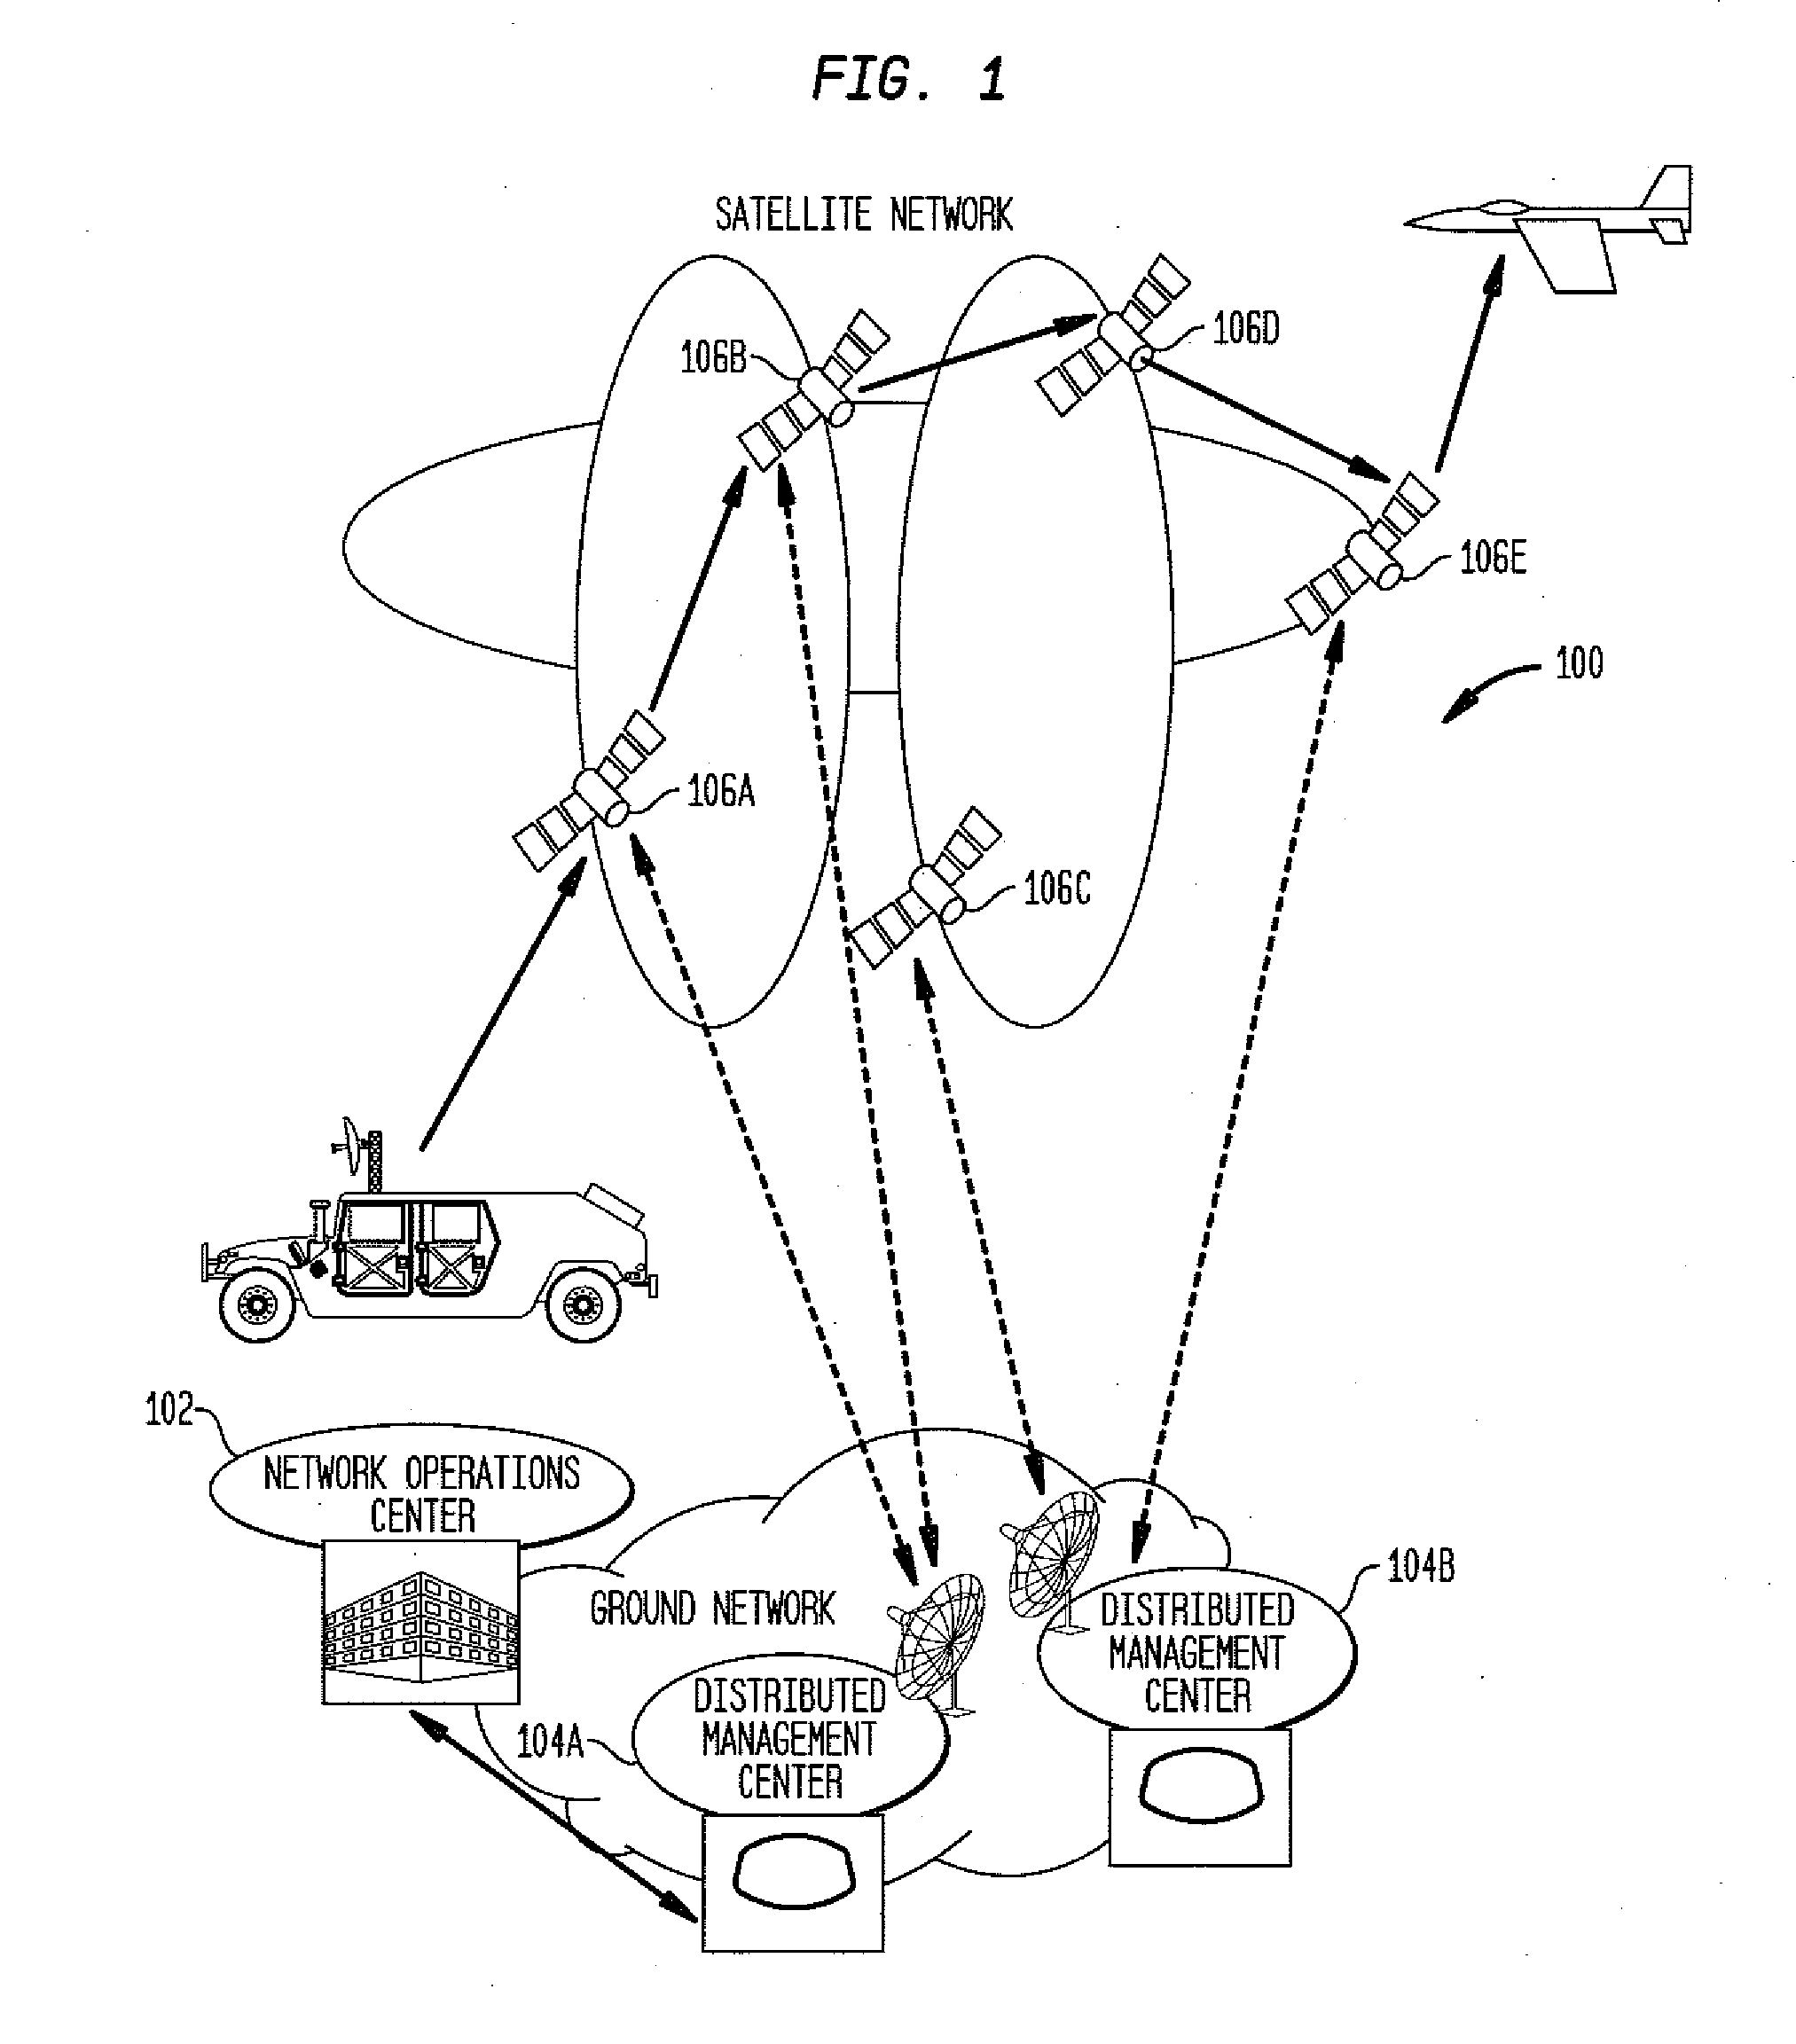 Method and system for determination of routes in leo satellite networks with bandwidth and priority awareness and adaptive rerouting